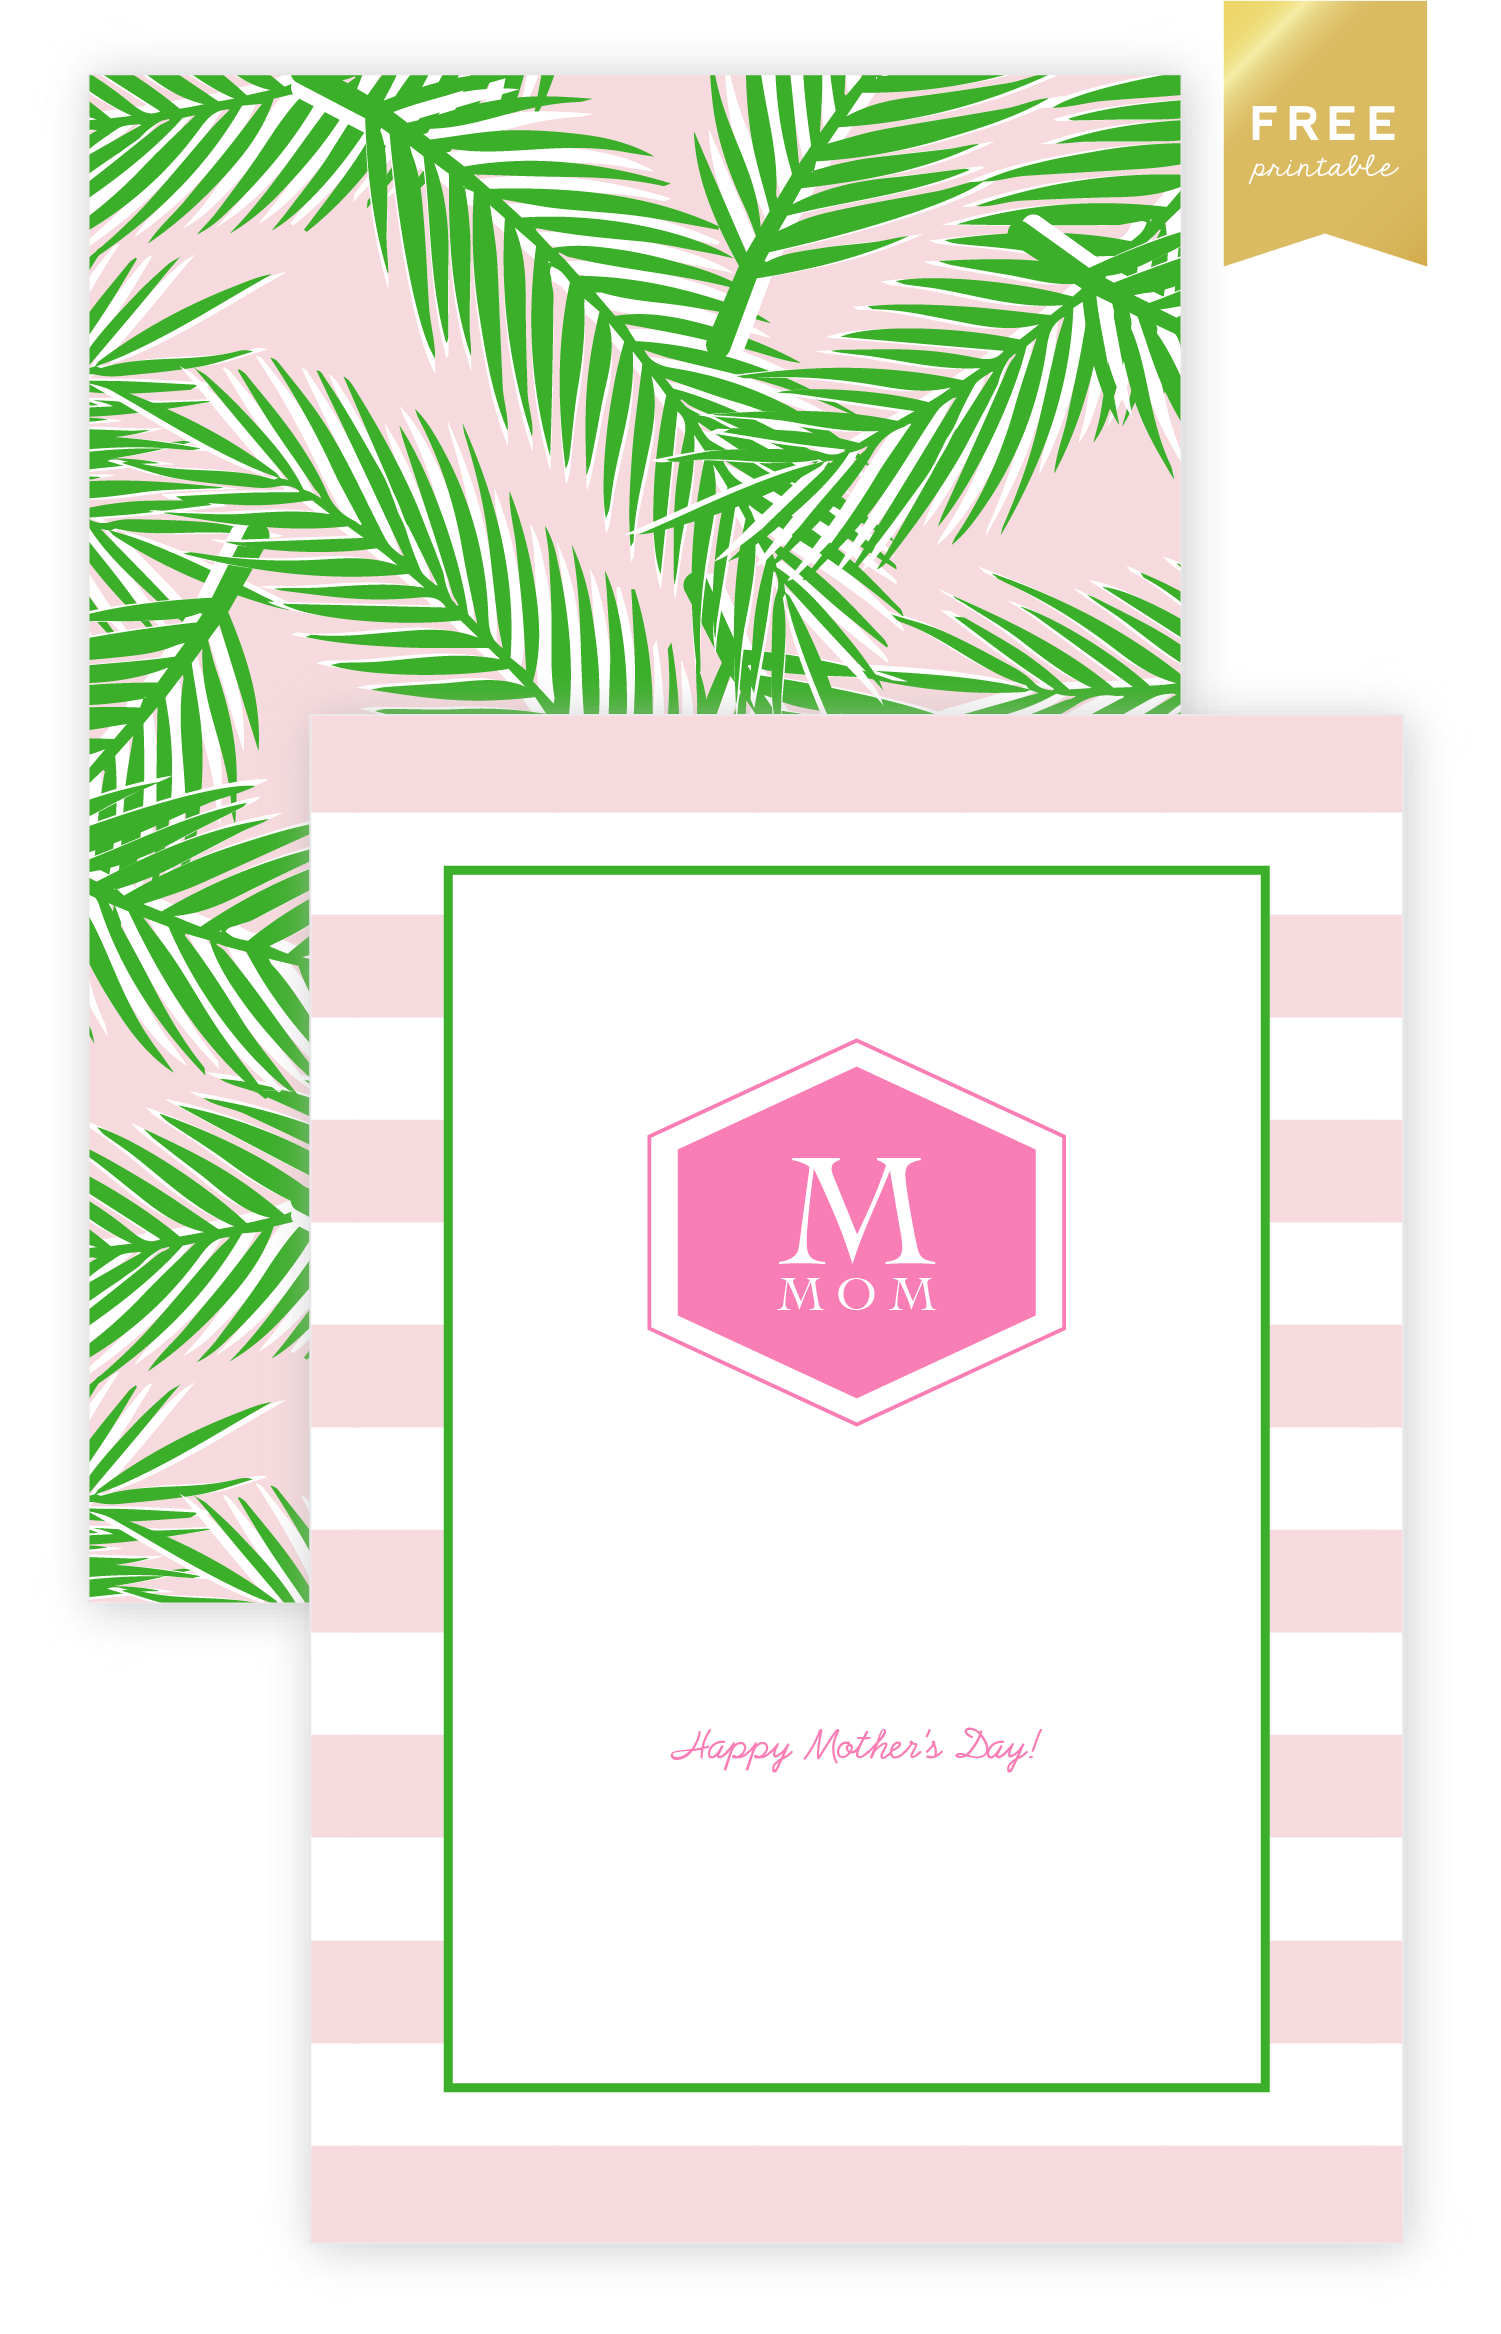 mother's day : free printable